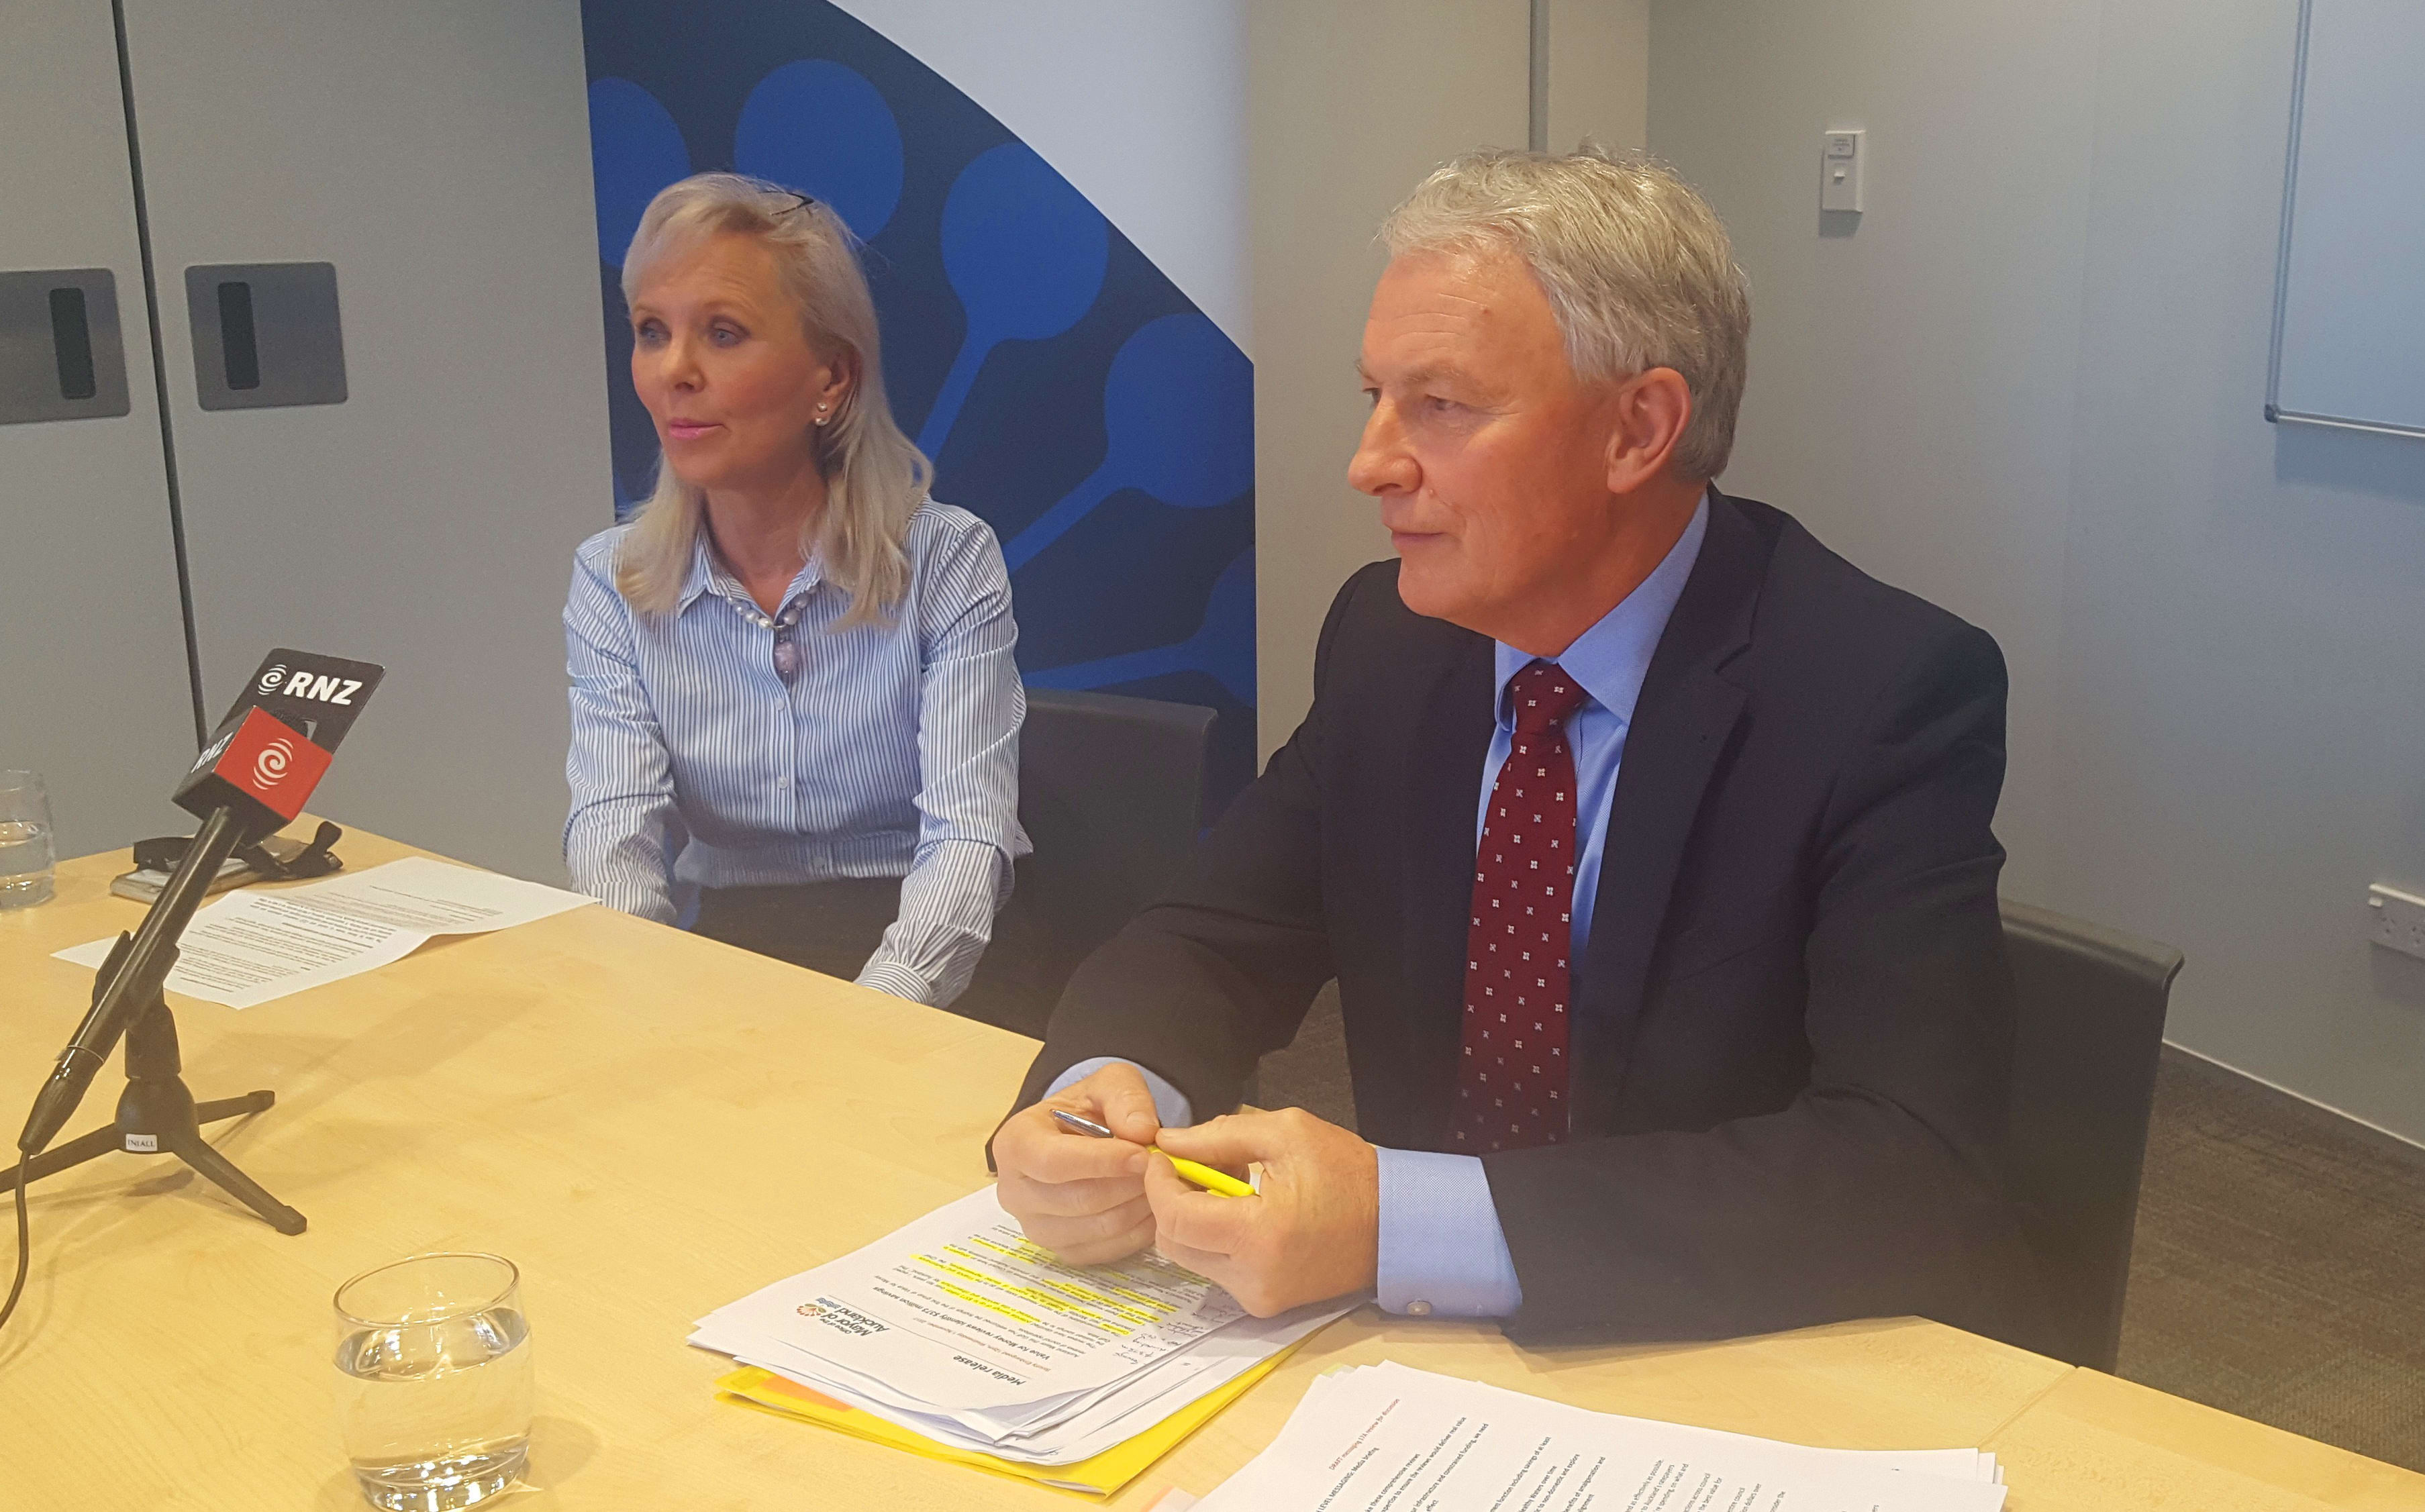 Mayor Phil Goff and Desley Simpson, the deputy chair of the Finance and Performance Committee outline findings from the four "Value for Money" reviews